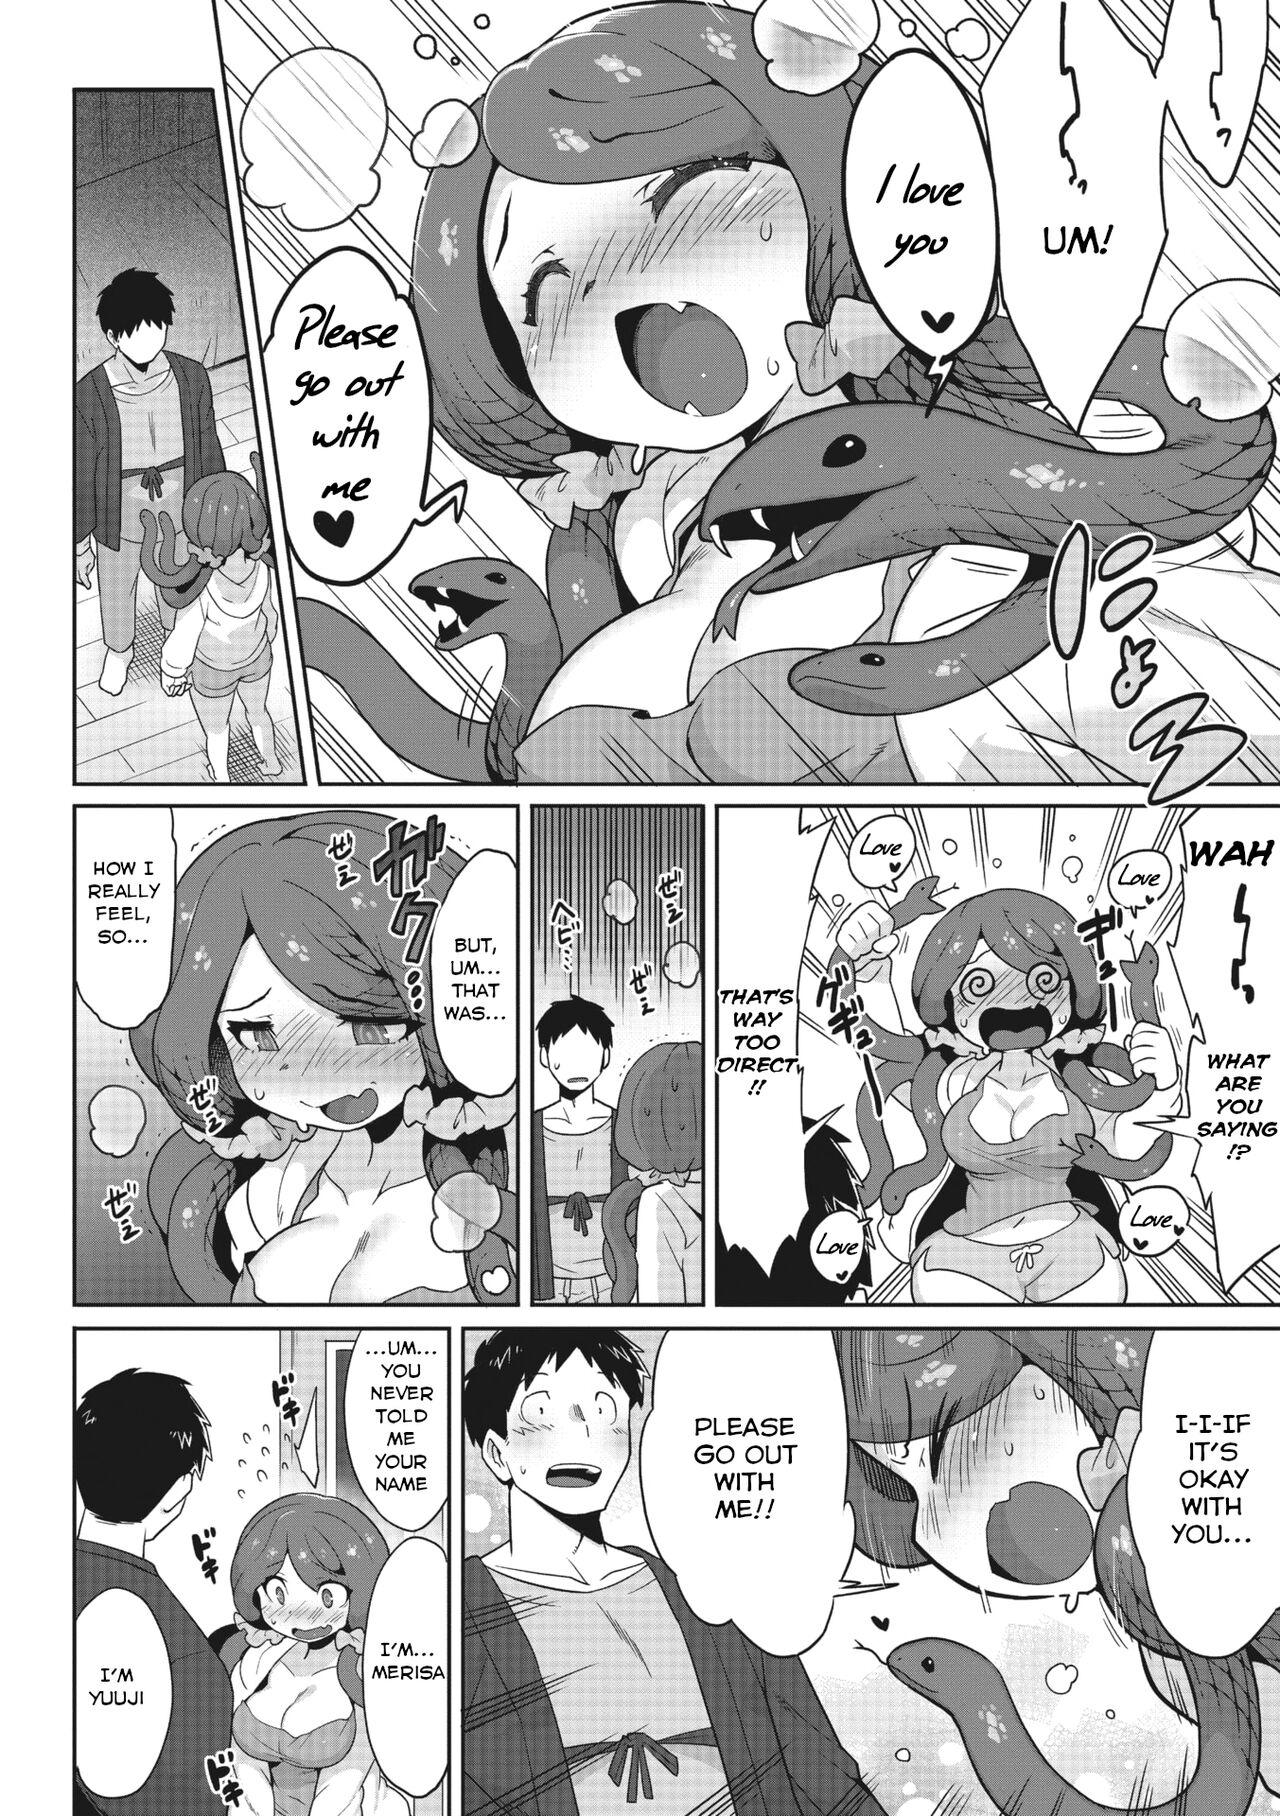 Sexteen Mitsumenaide, dakishimete. | Don't look, just hold me. Sexy - Page 8